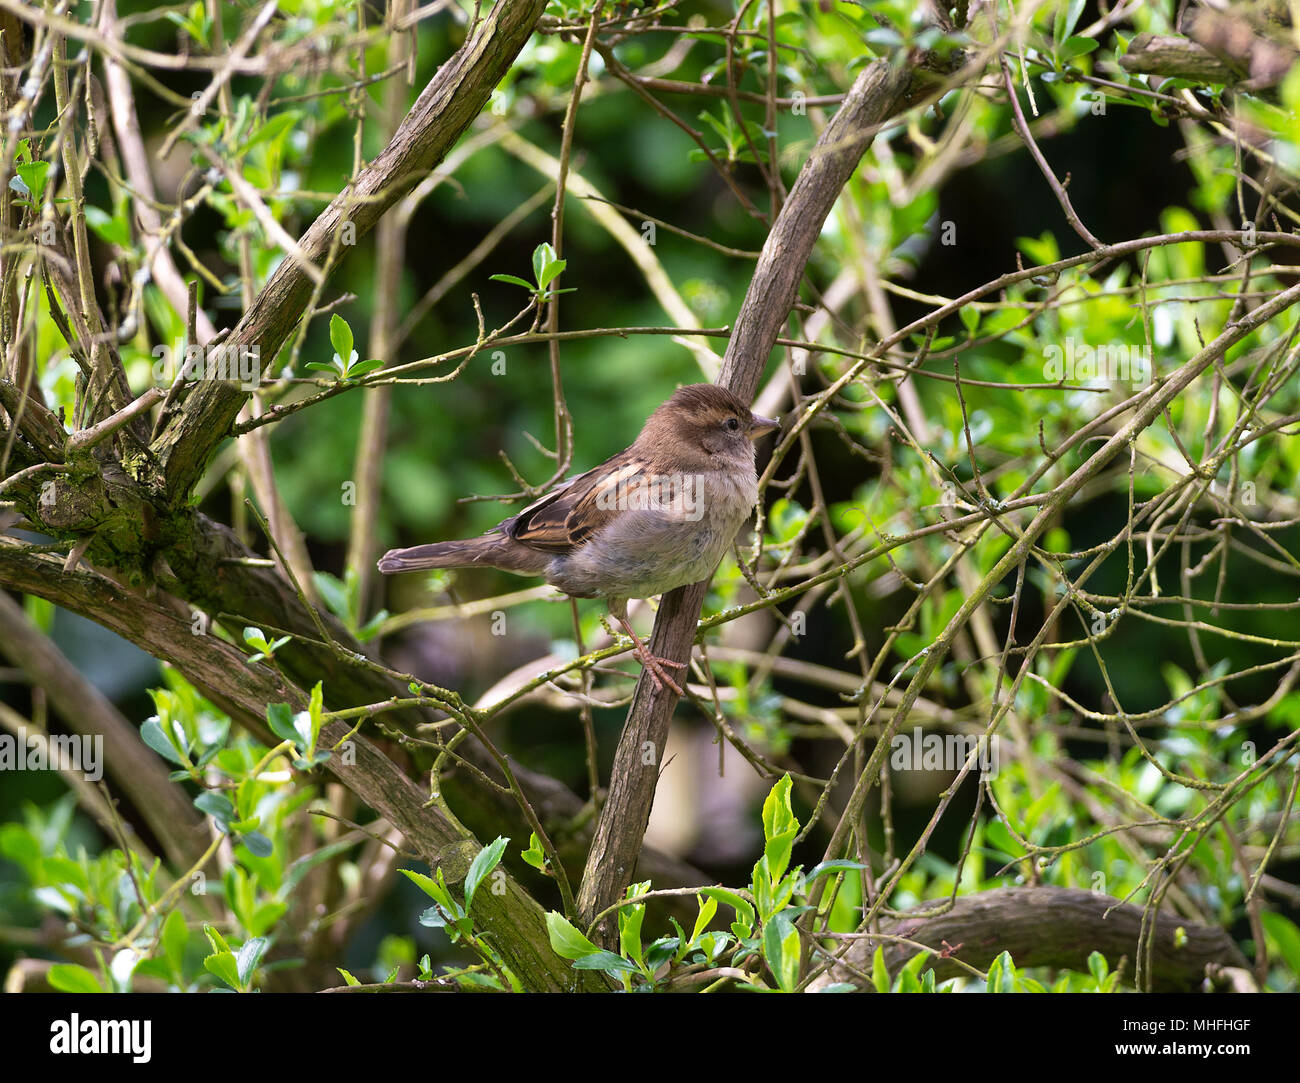 An Adult Female House Sparrow Perching in an Escallonia Bush in a Garden in Alsager Cheshire England United Kingdom UK Stock Photo